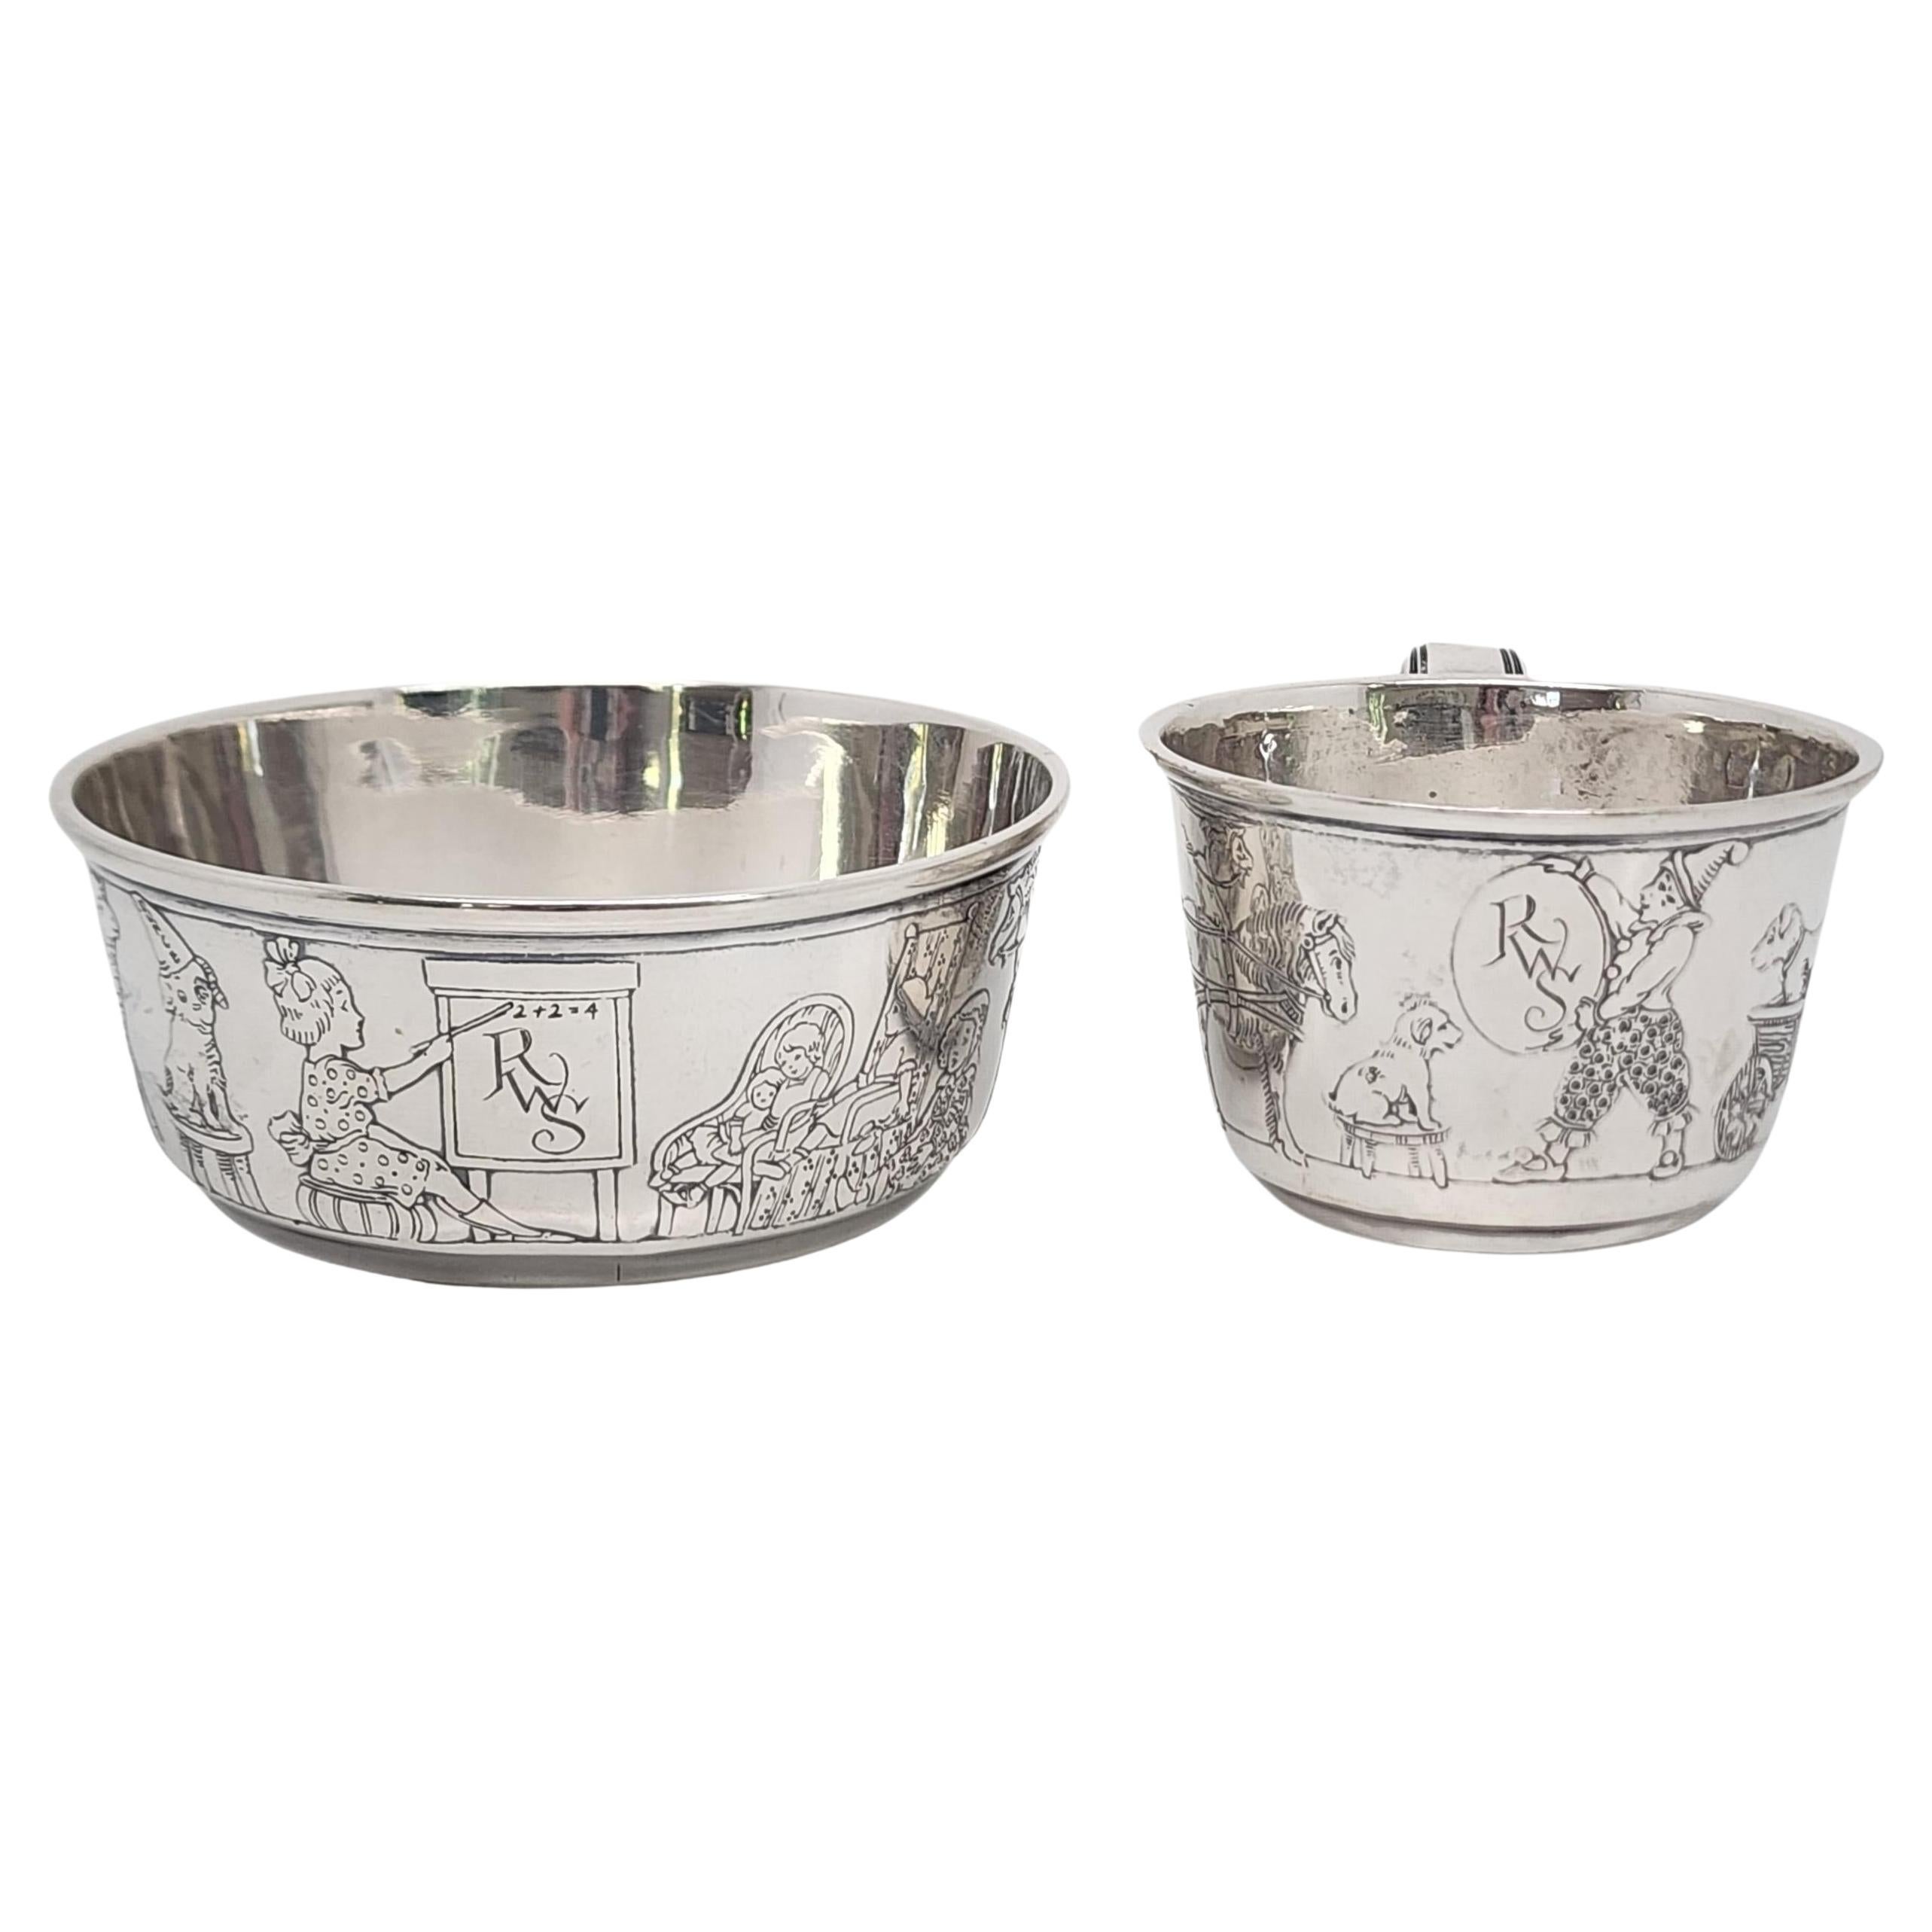 R Blackinton & Co Sterling Silver Child Bowl and Cup w/Mono #15714